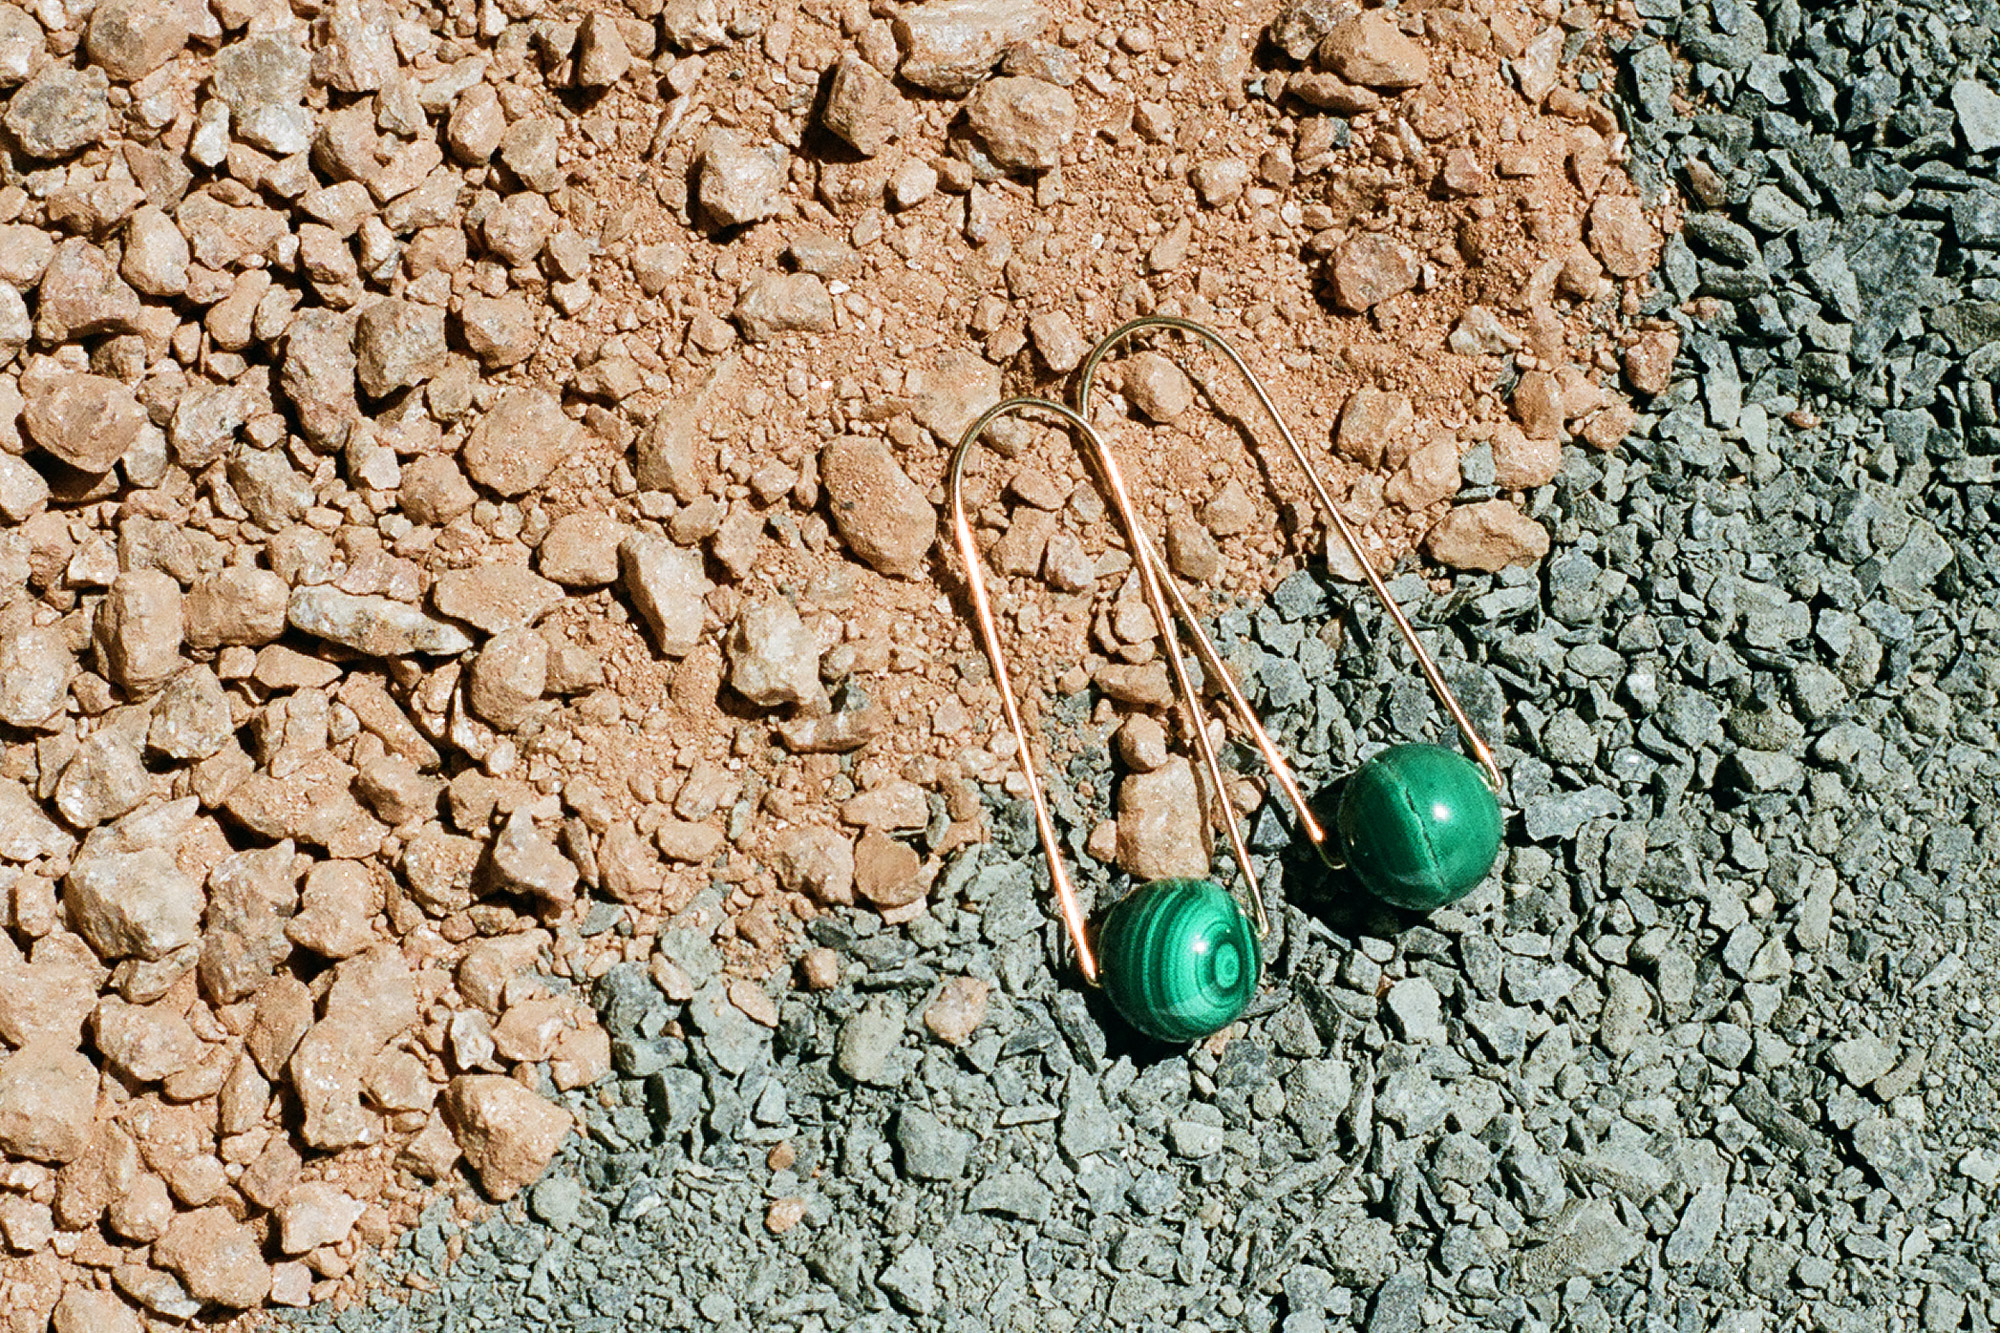 Molo earrings in malachite from TTWK Spring/Summer 2016 collection, Ritual